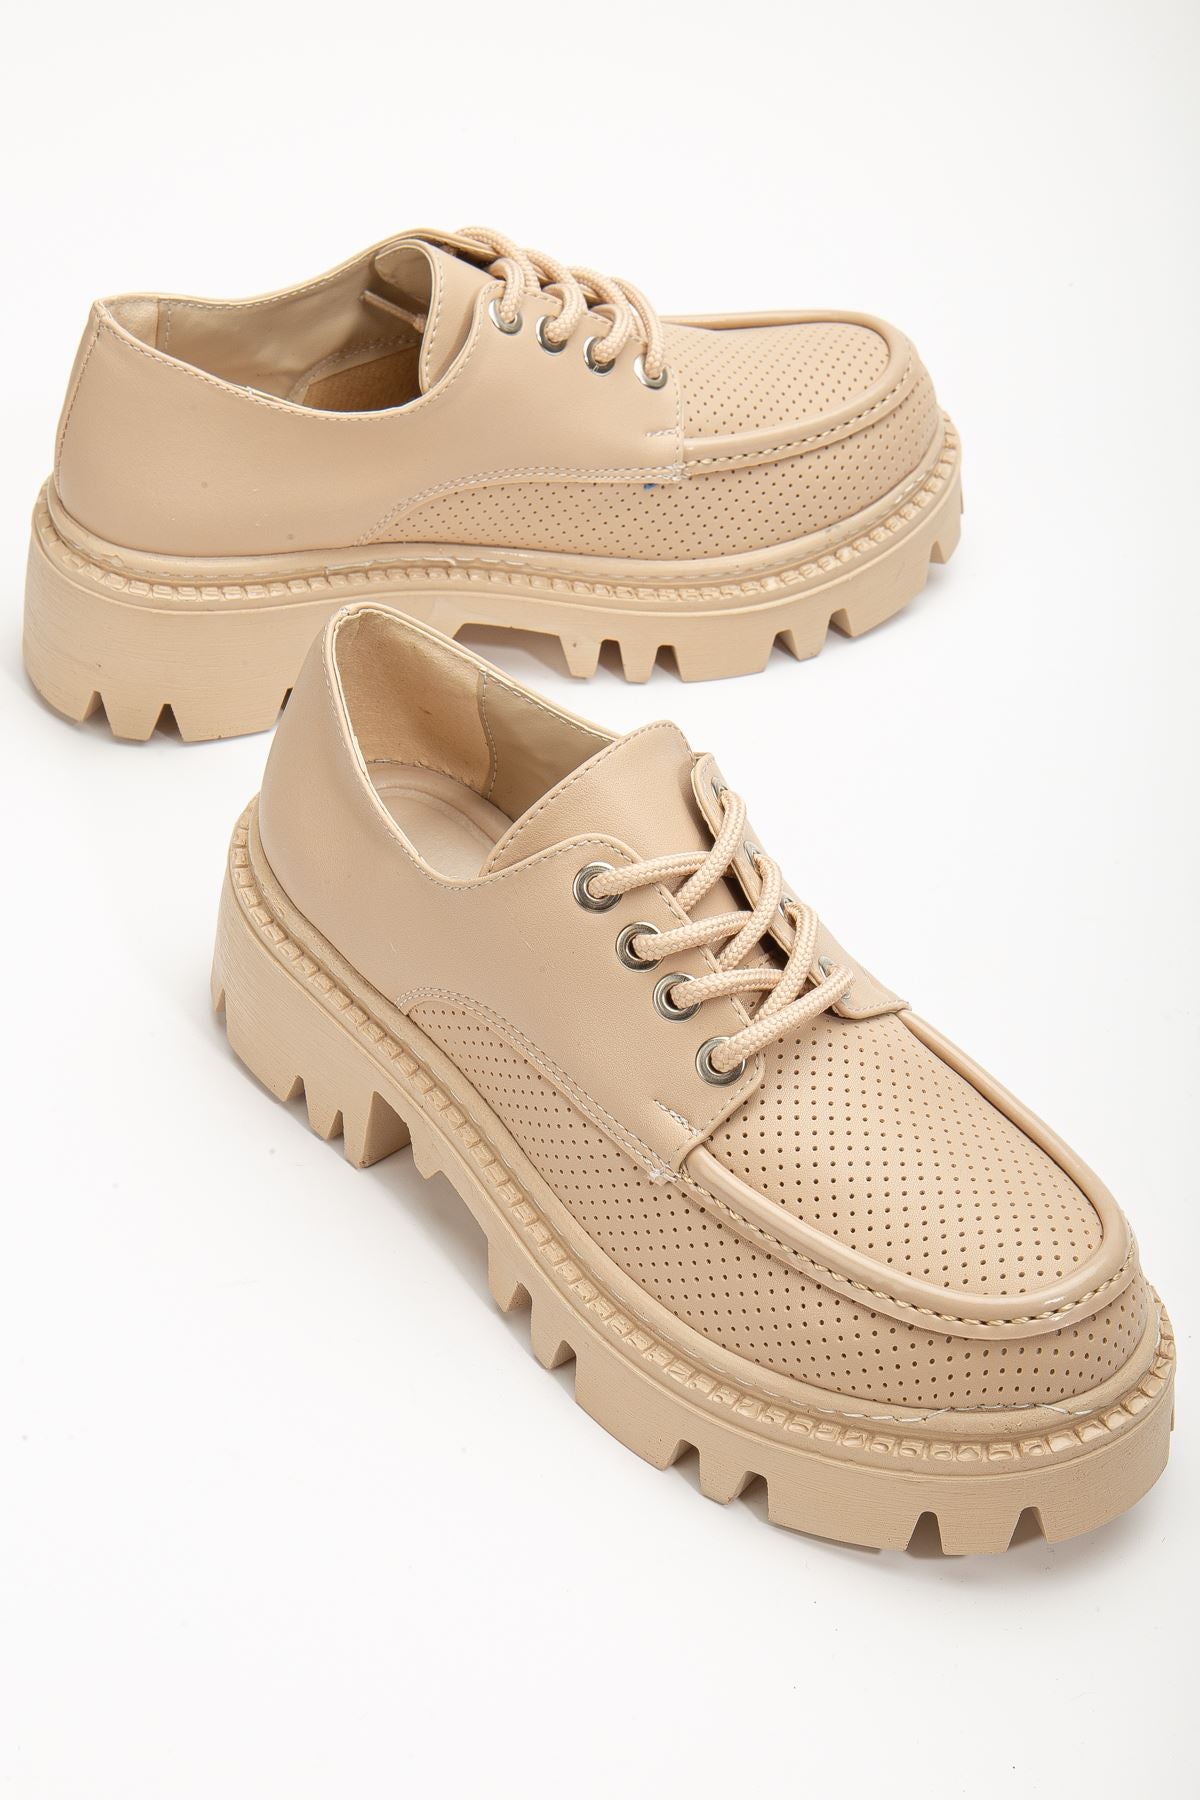 Women's Nude Lacing Detailed Oxford Shoes - STREETMODE ™